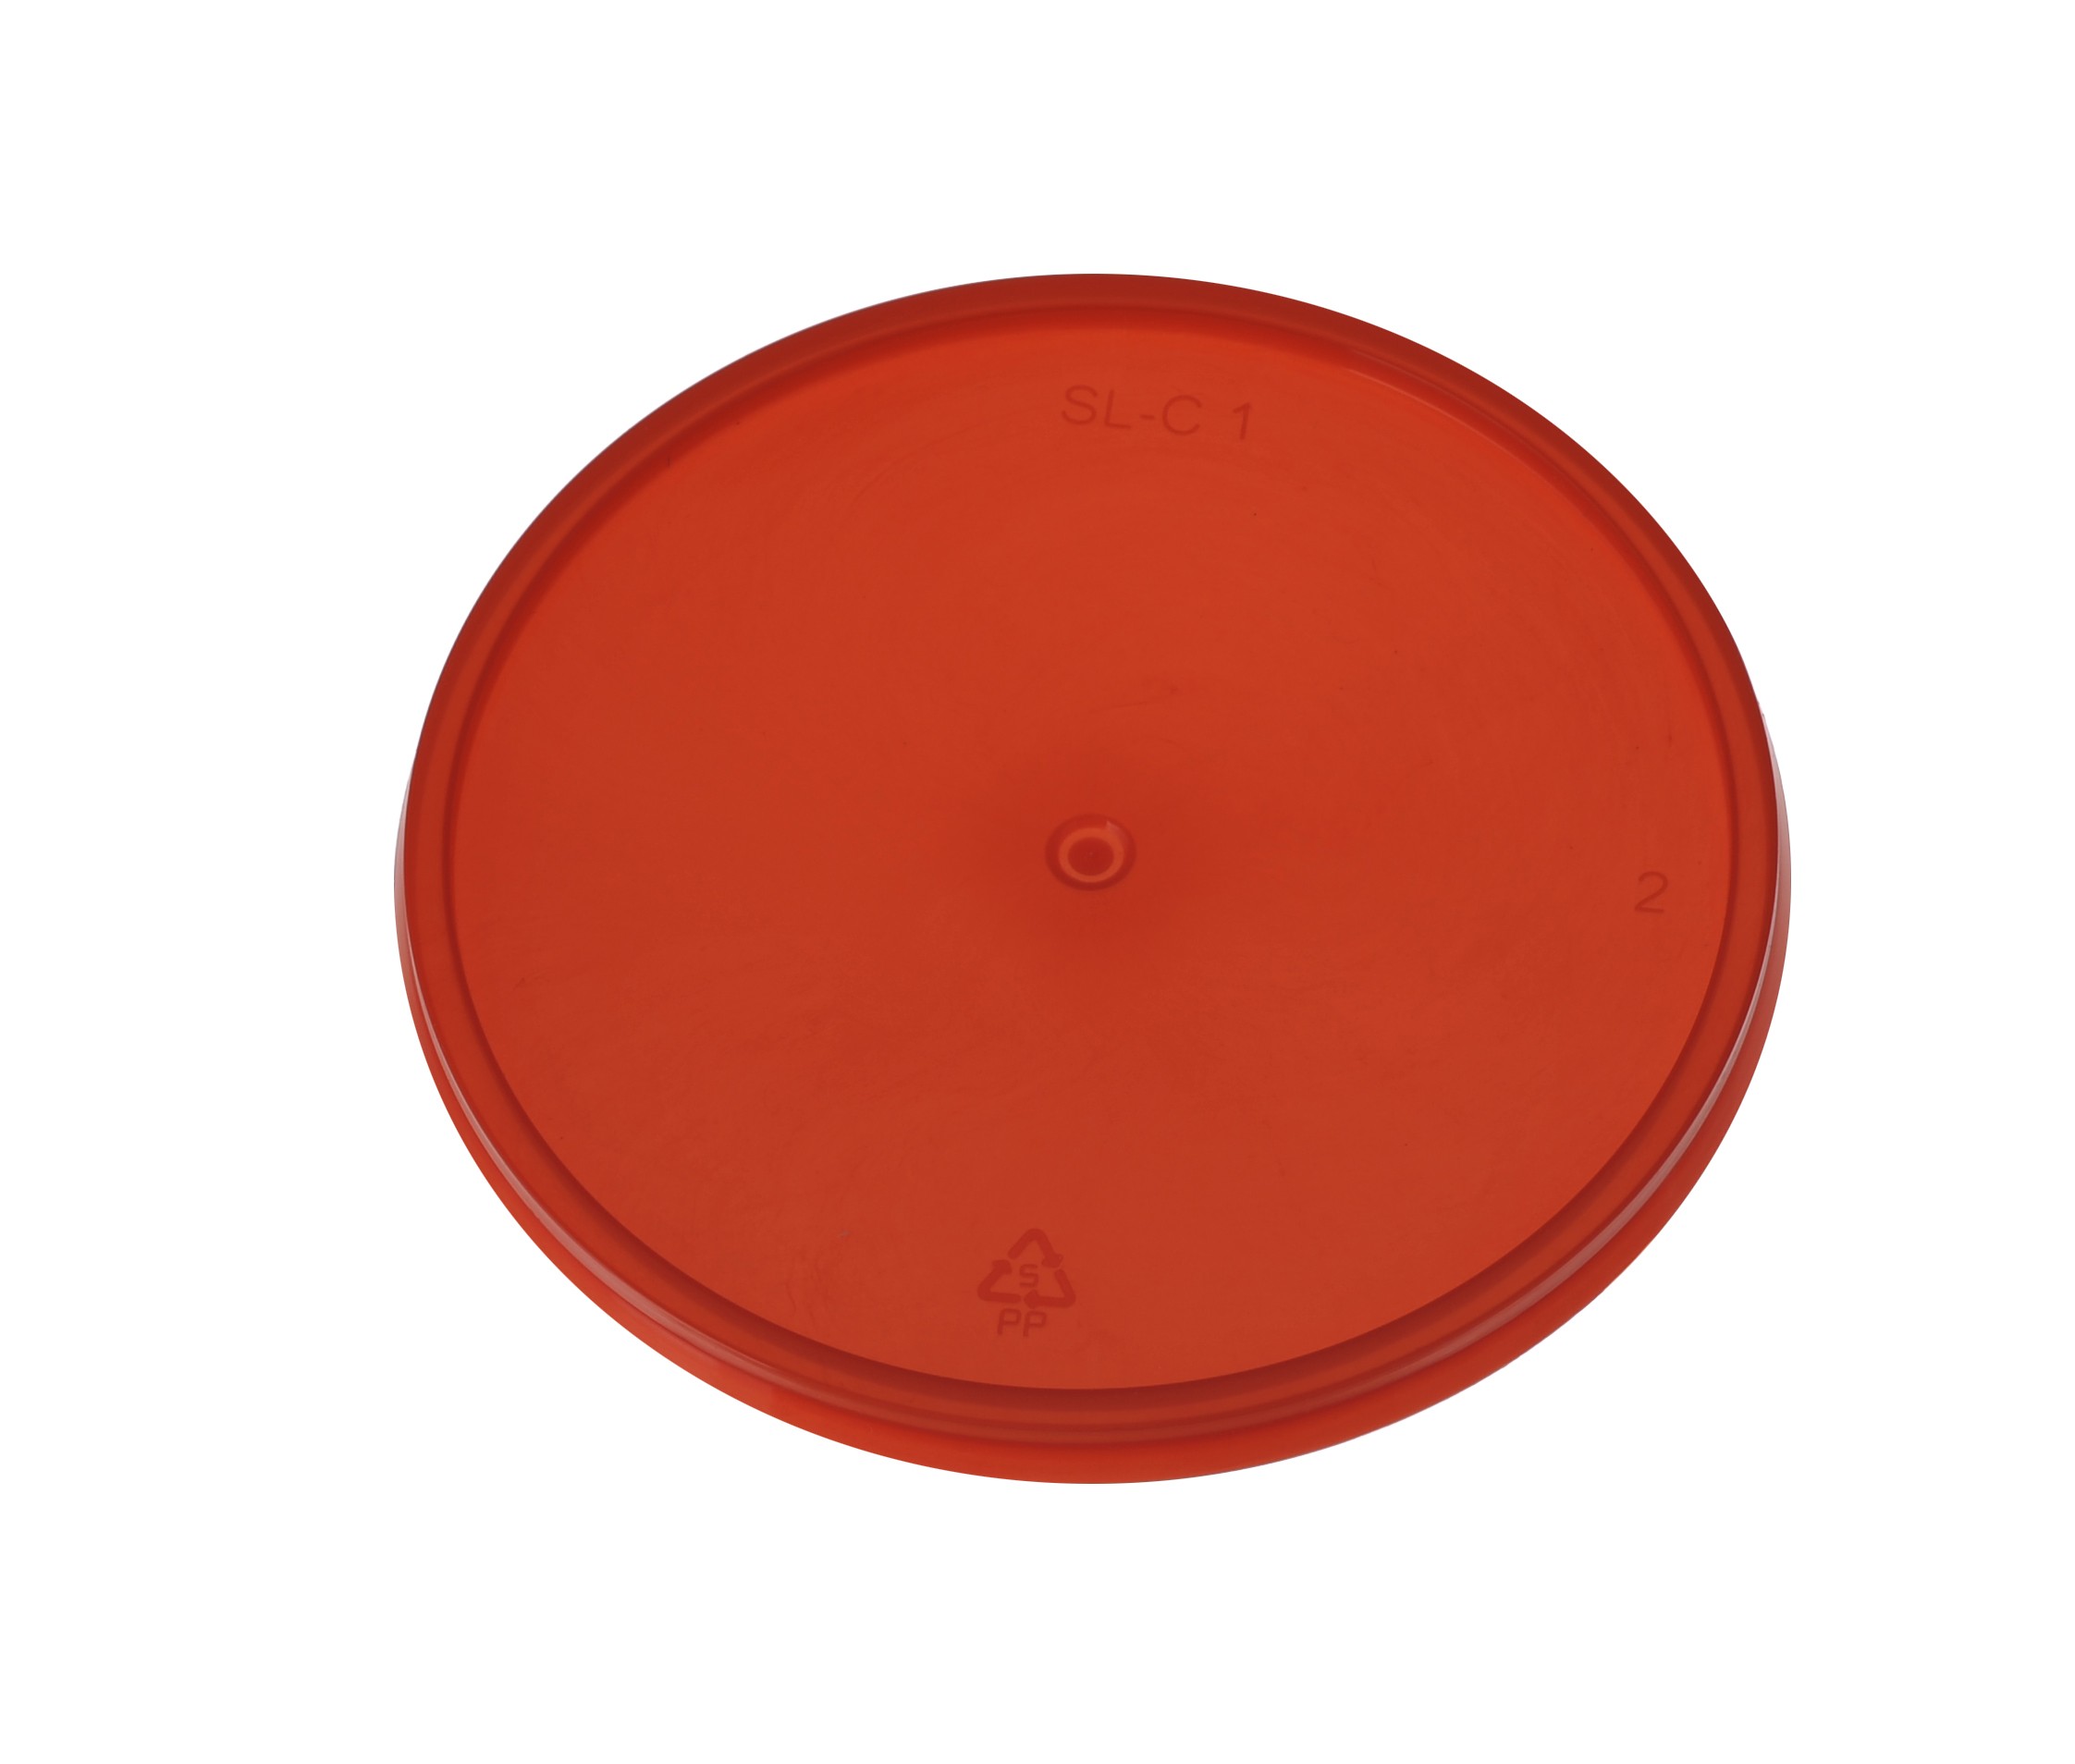 MS SL C1 Red Lid (for SL300-1000) 